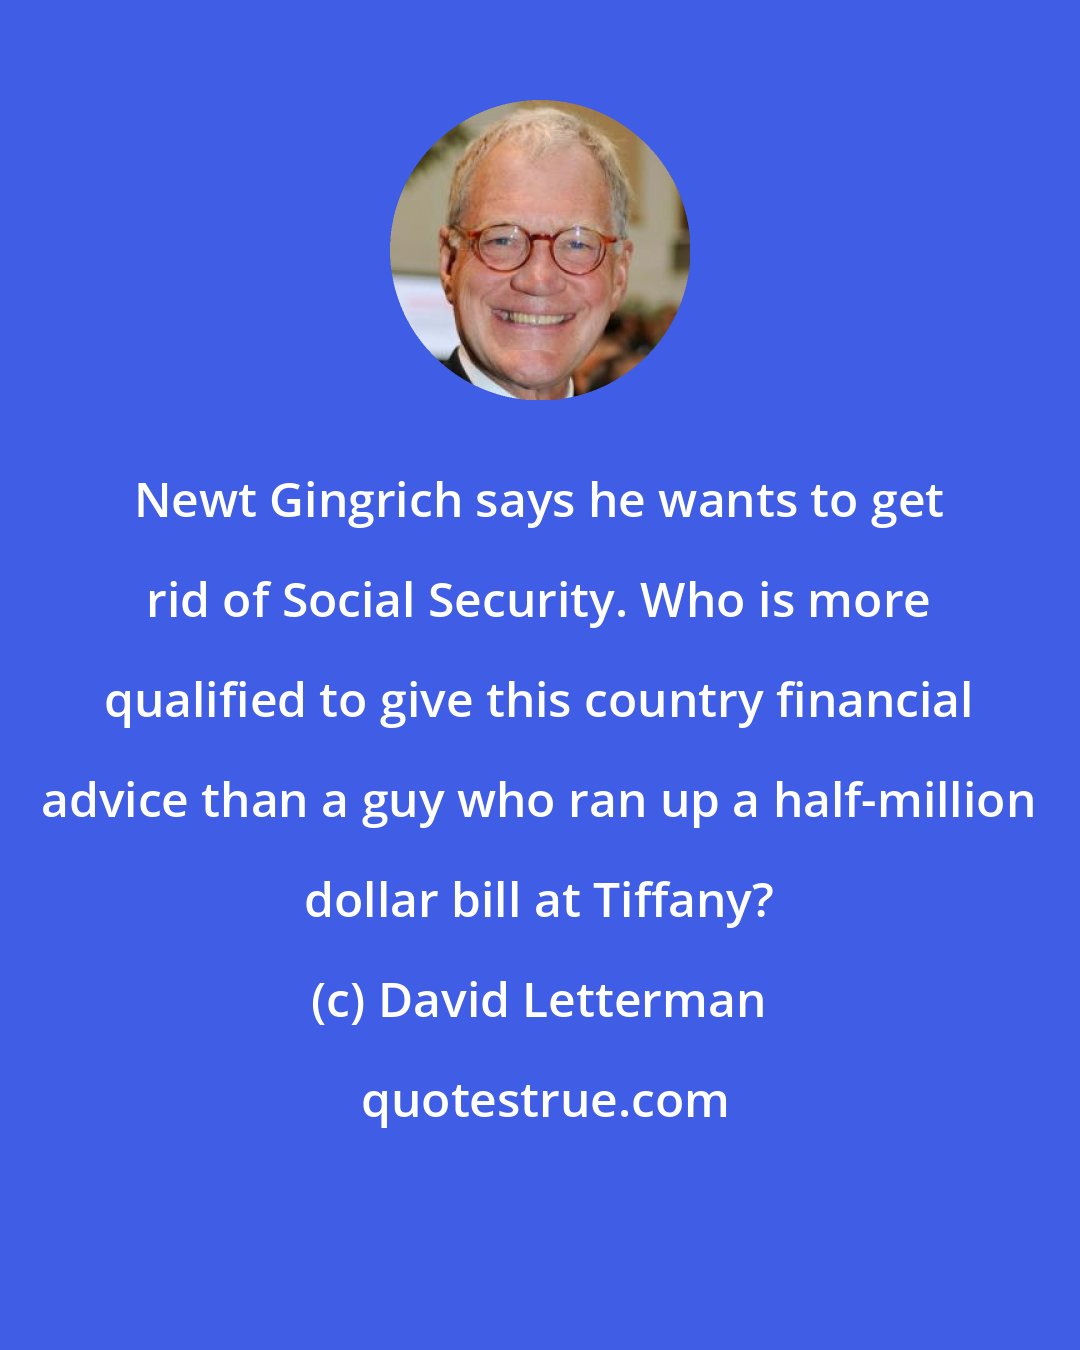 David Letterman: Newt Gingrich says he wants to get rid of Social Security. Who is more qualified to give this country financial advice than a guy who ran up a half-million dollar bill at Tiffany?